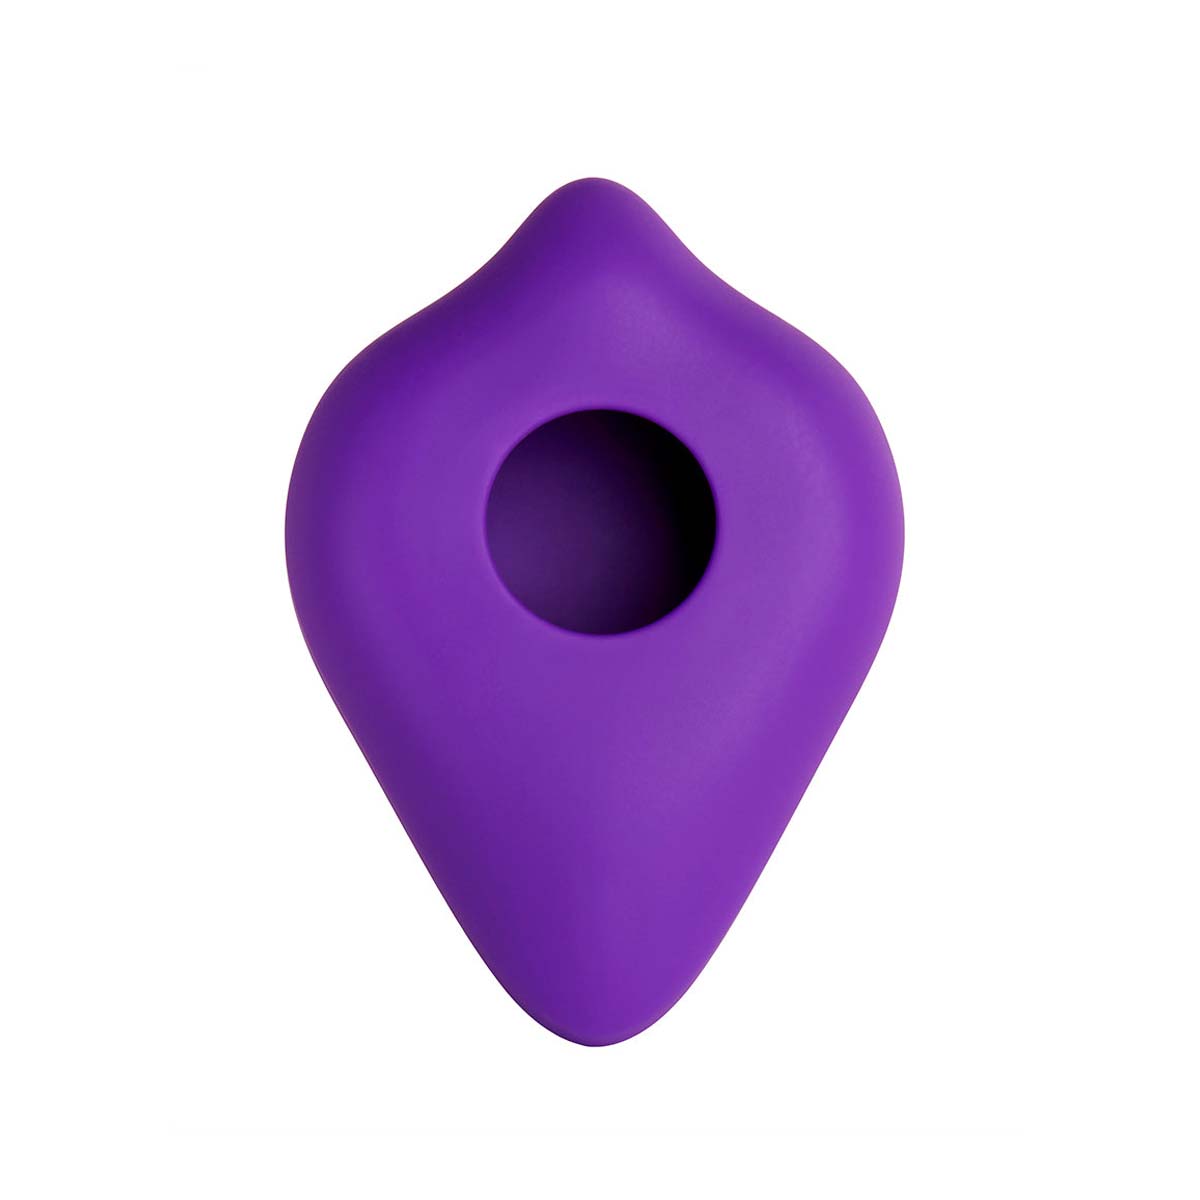 Back of a purple silicone stimulation cushion with hole to fit over dildo Nudie Co